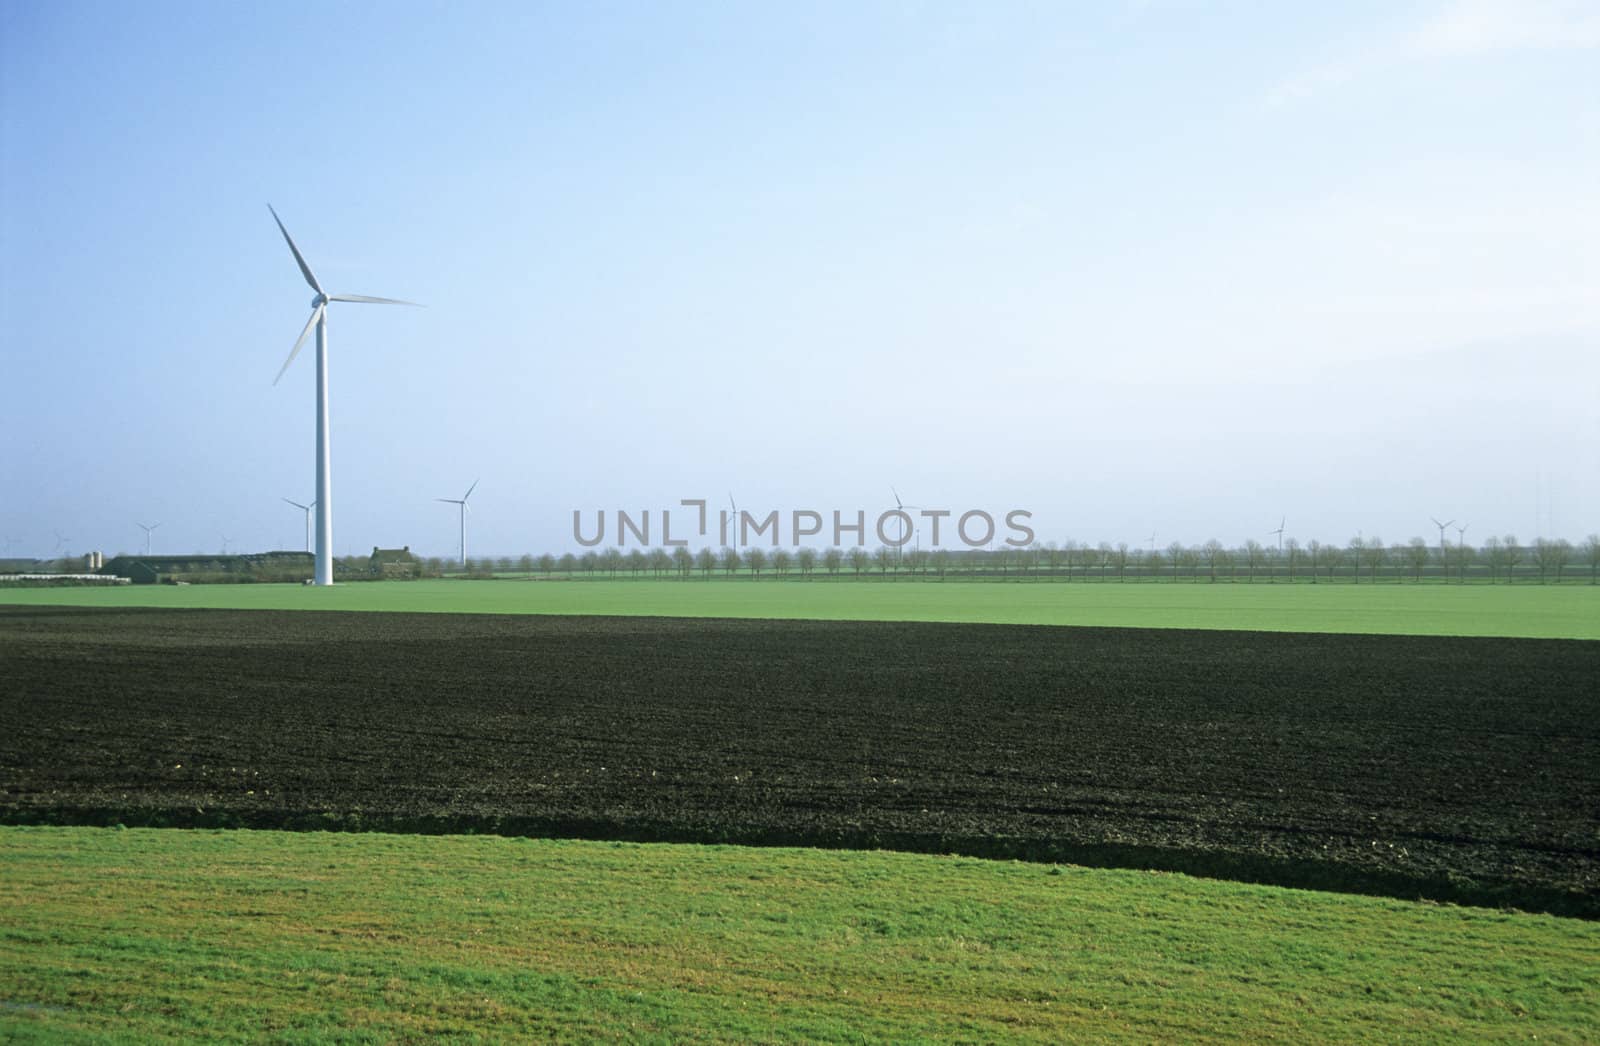 Modern windmills, or wind turbines, dot the lowland countryside of the Netherlands.